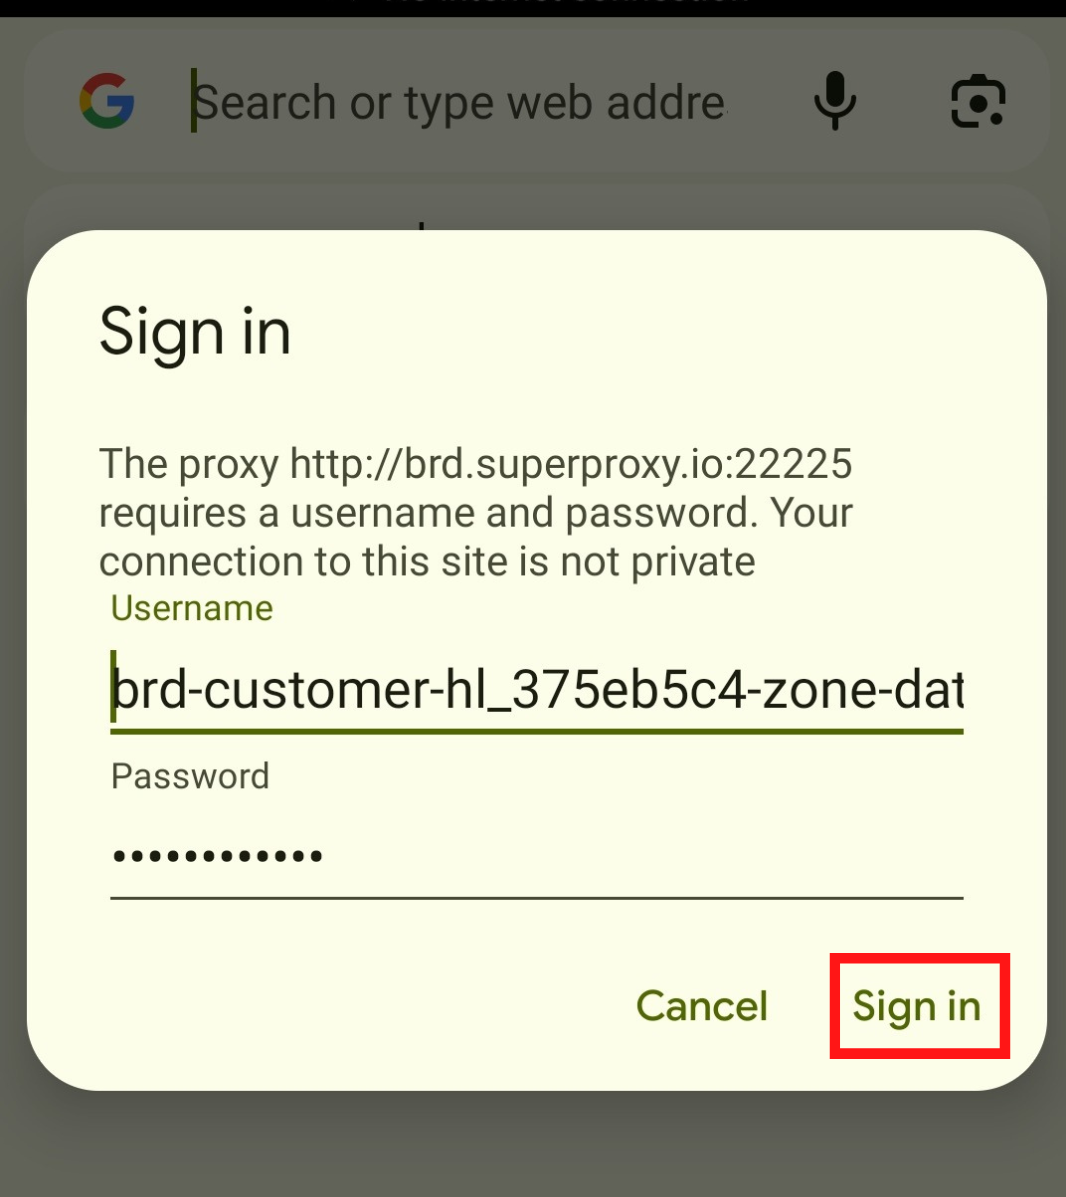 Sign in screen for proxy username and password.